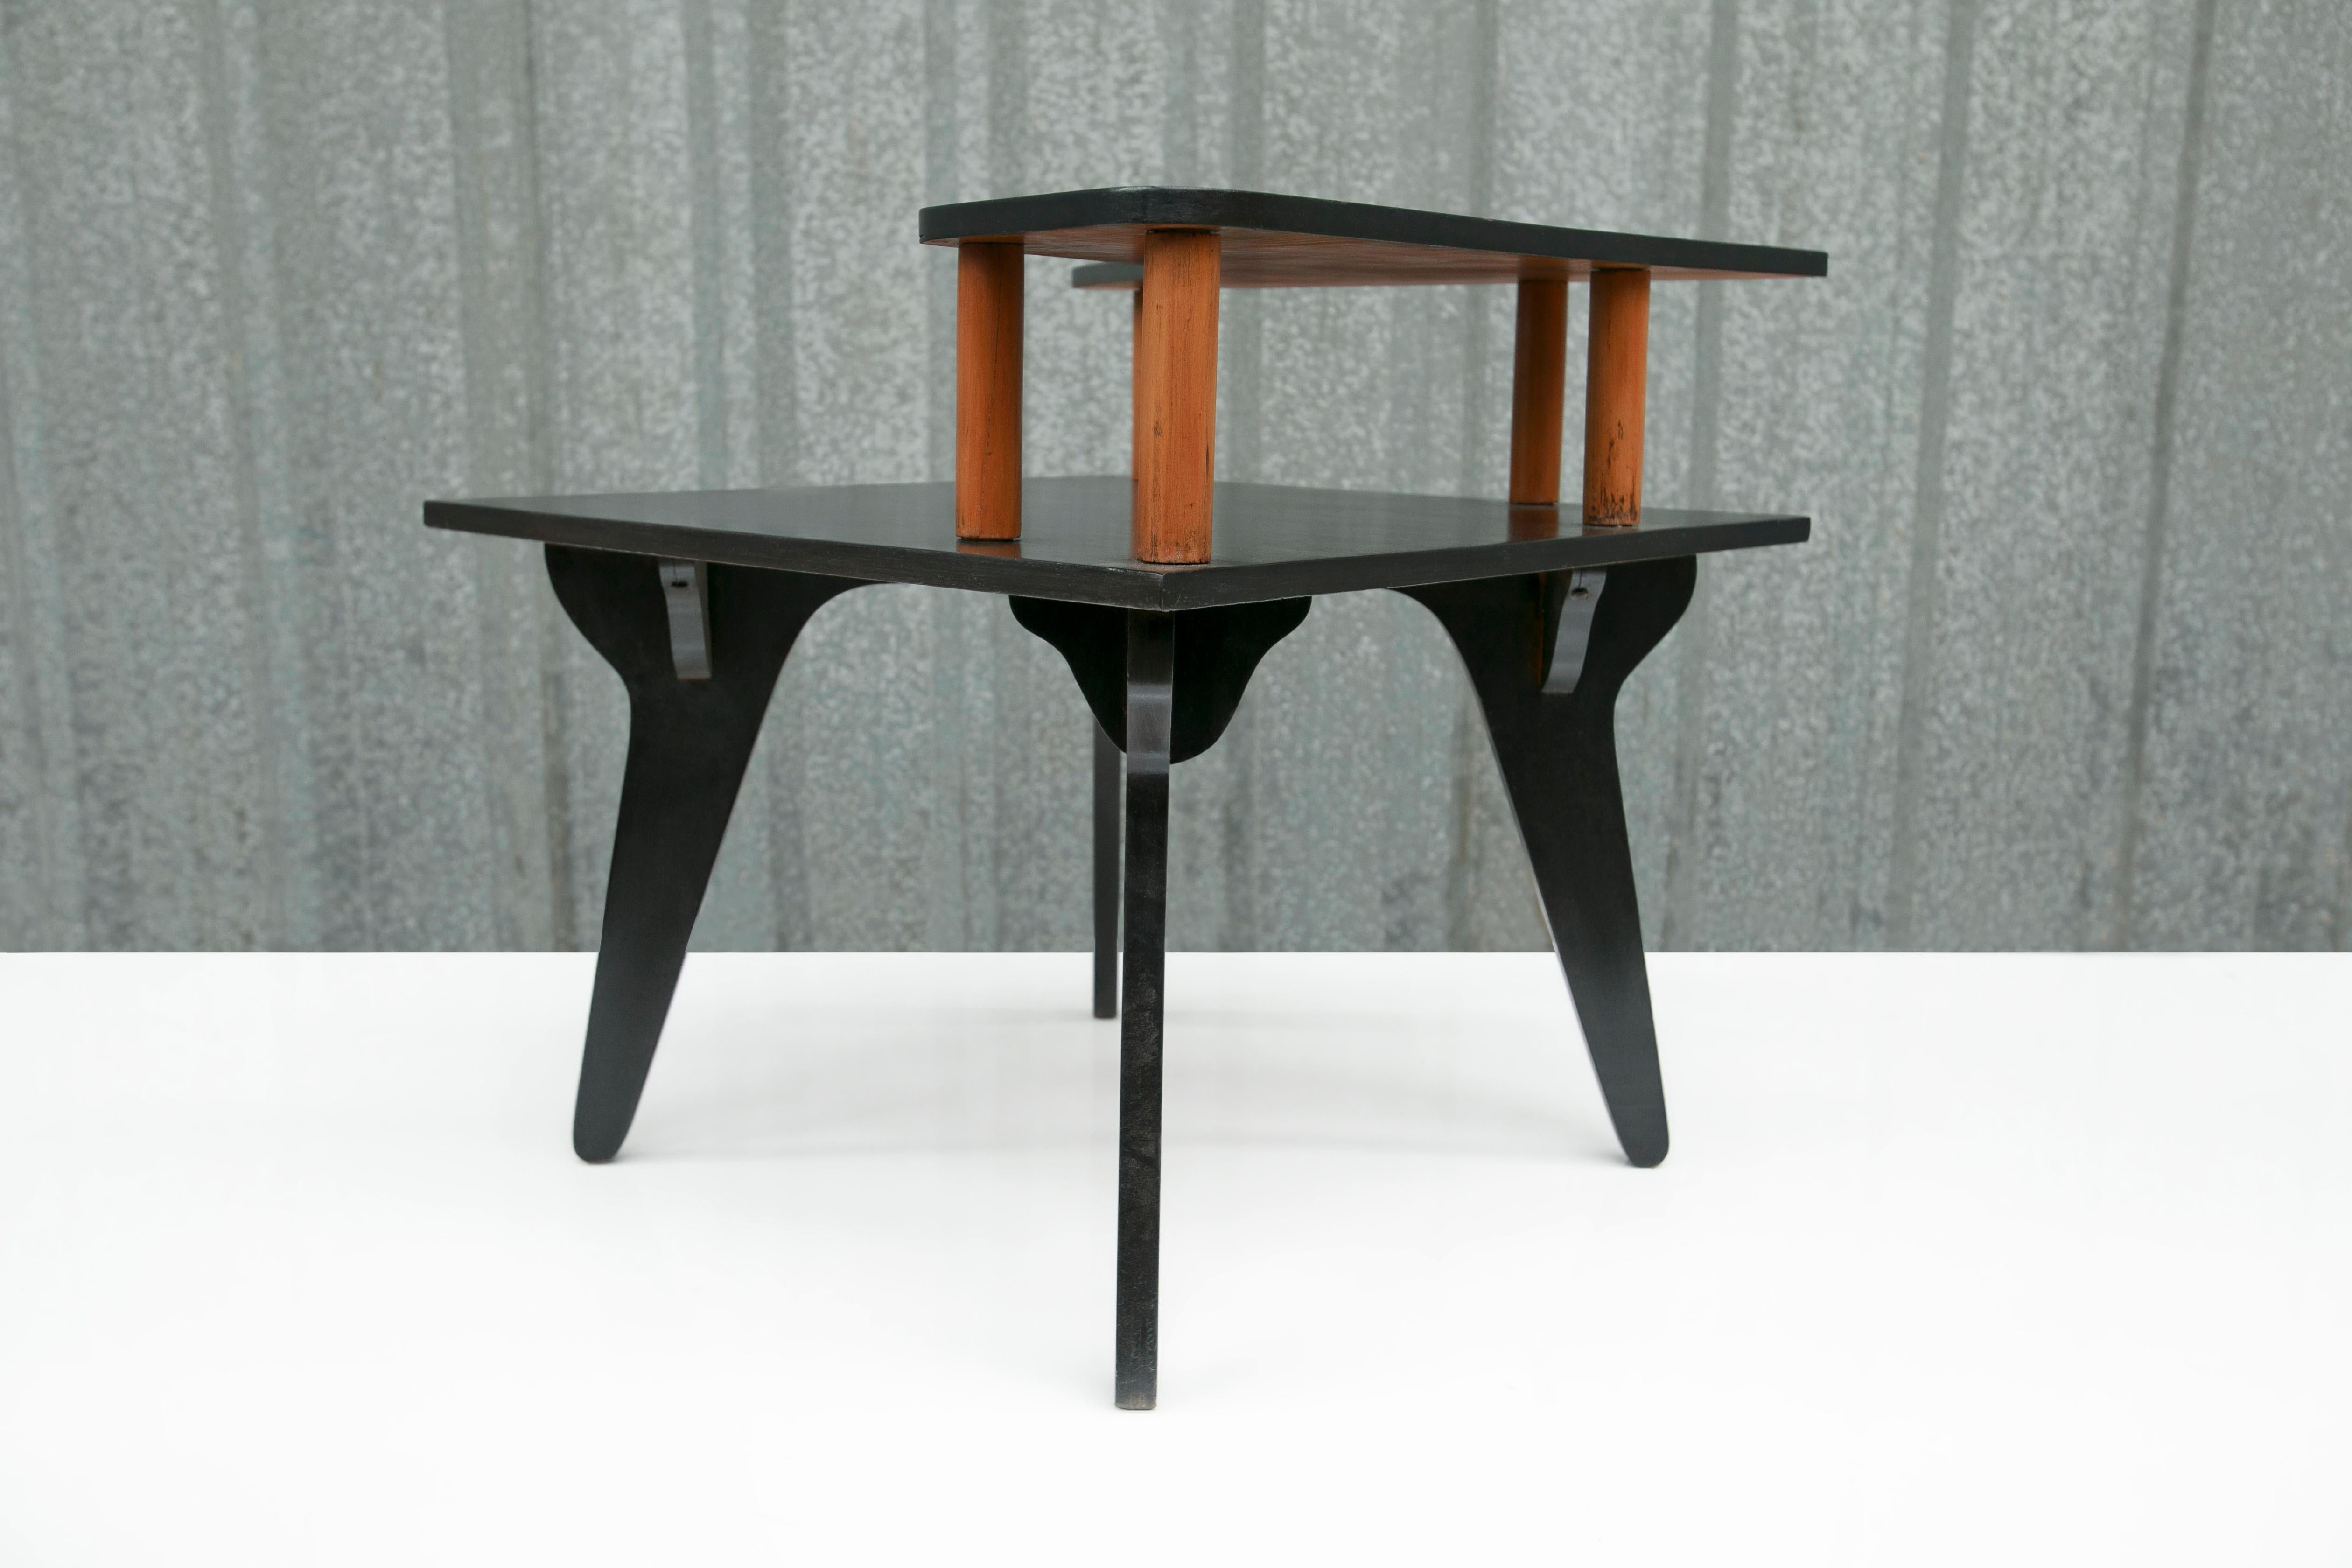 Available right now, this Mid Century Modern accent/phone table in plywood designed by Jose Zanine Caldas in the fifties is beautiful! The table consists of four legs and two shelves painted in black. Zanine’s manufacturing seal is under the table